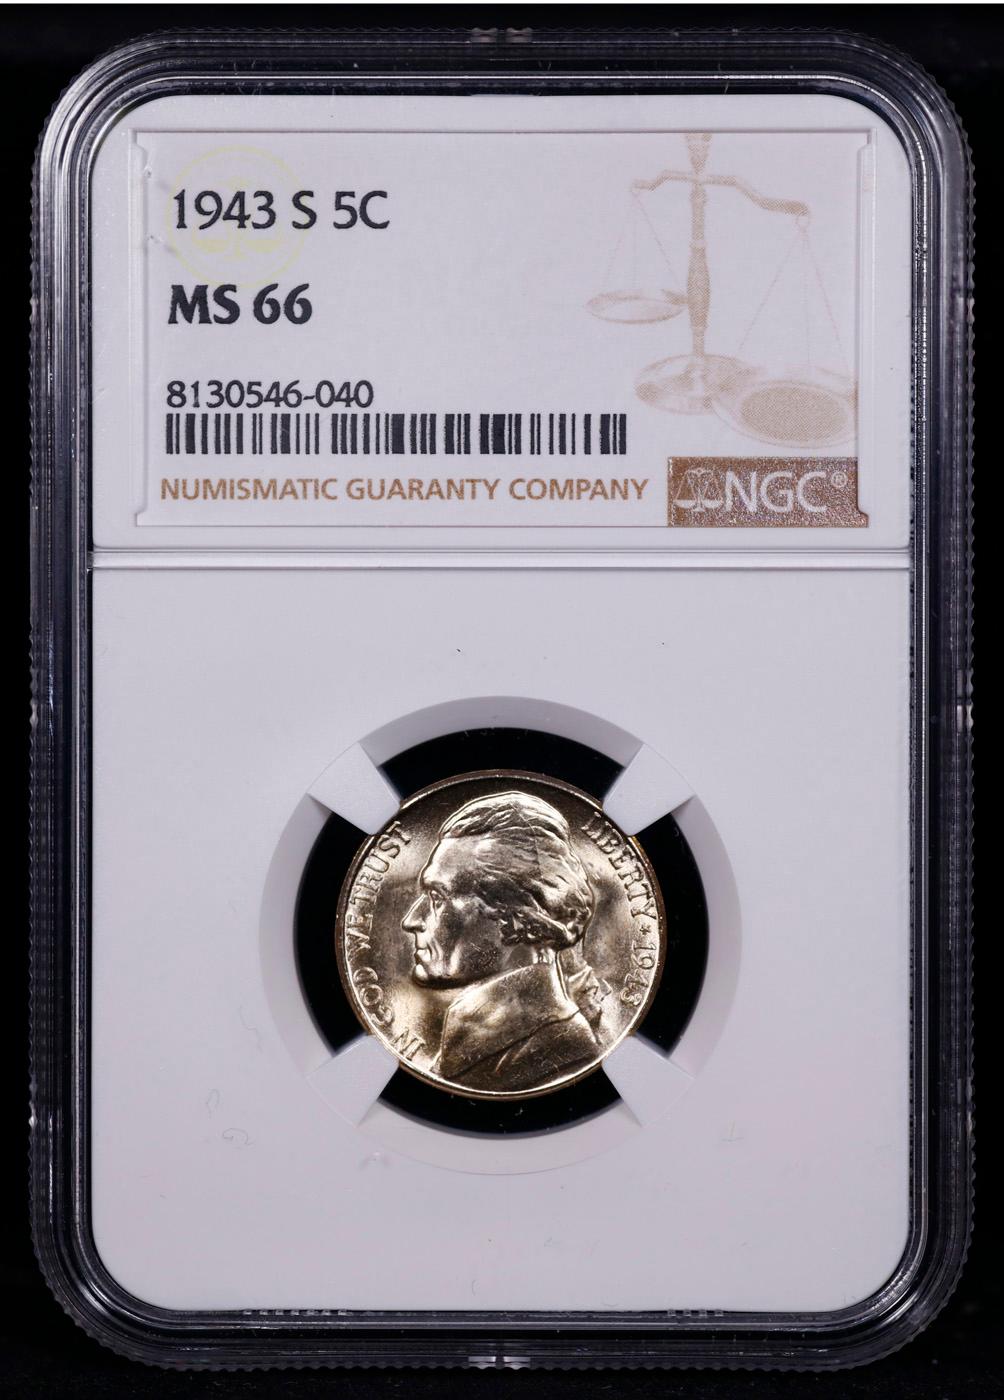 NGC 1943-s Jefferson Nickel 5c Graded ms66 By NGC